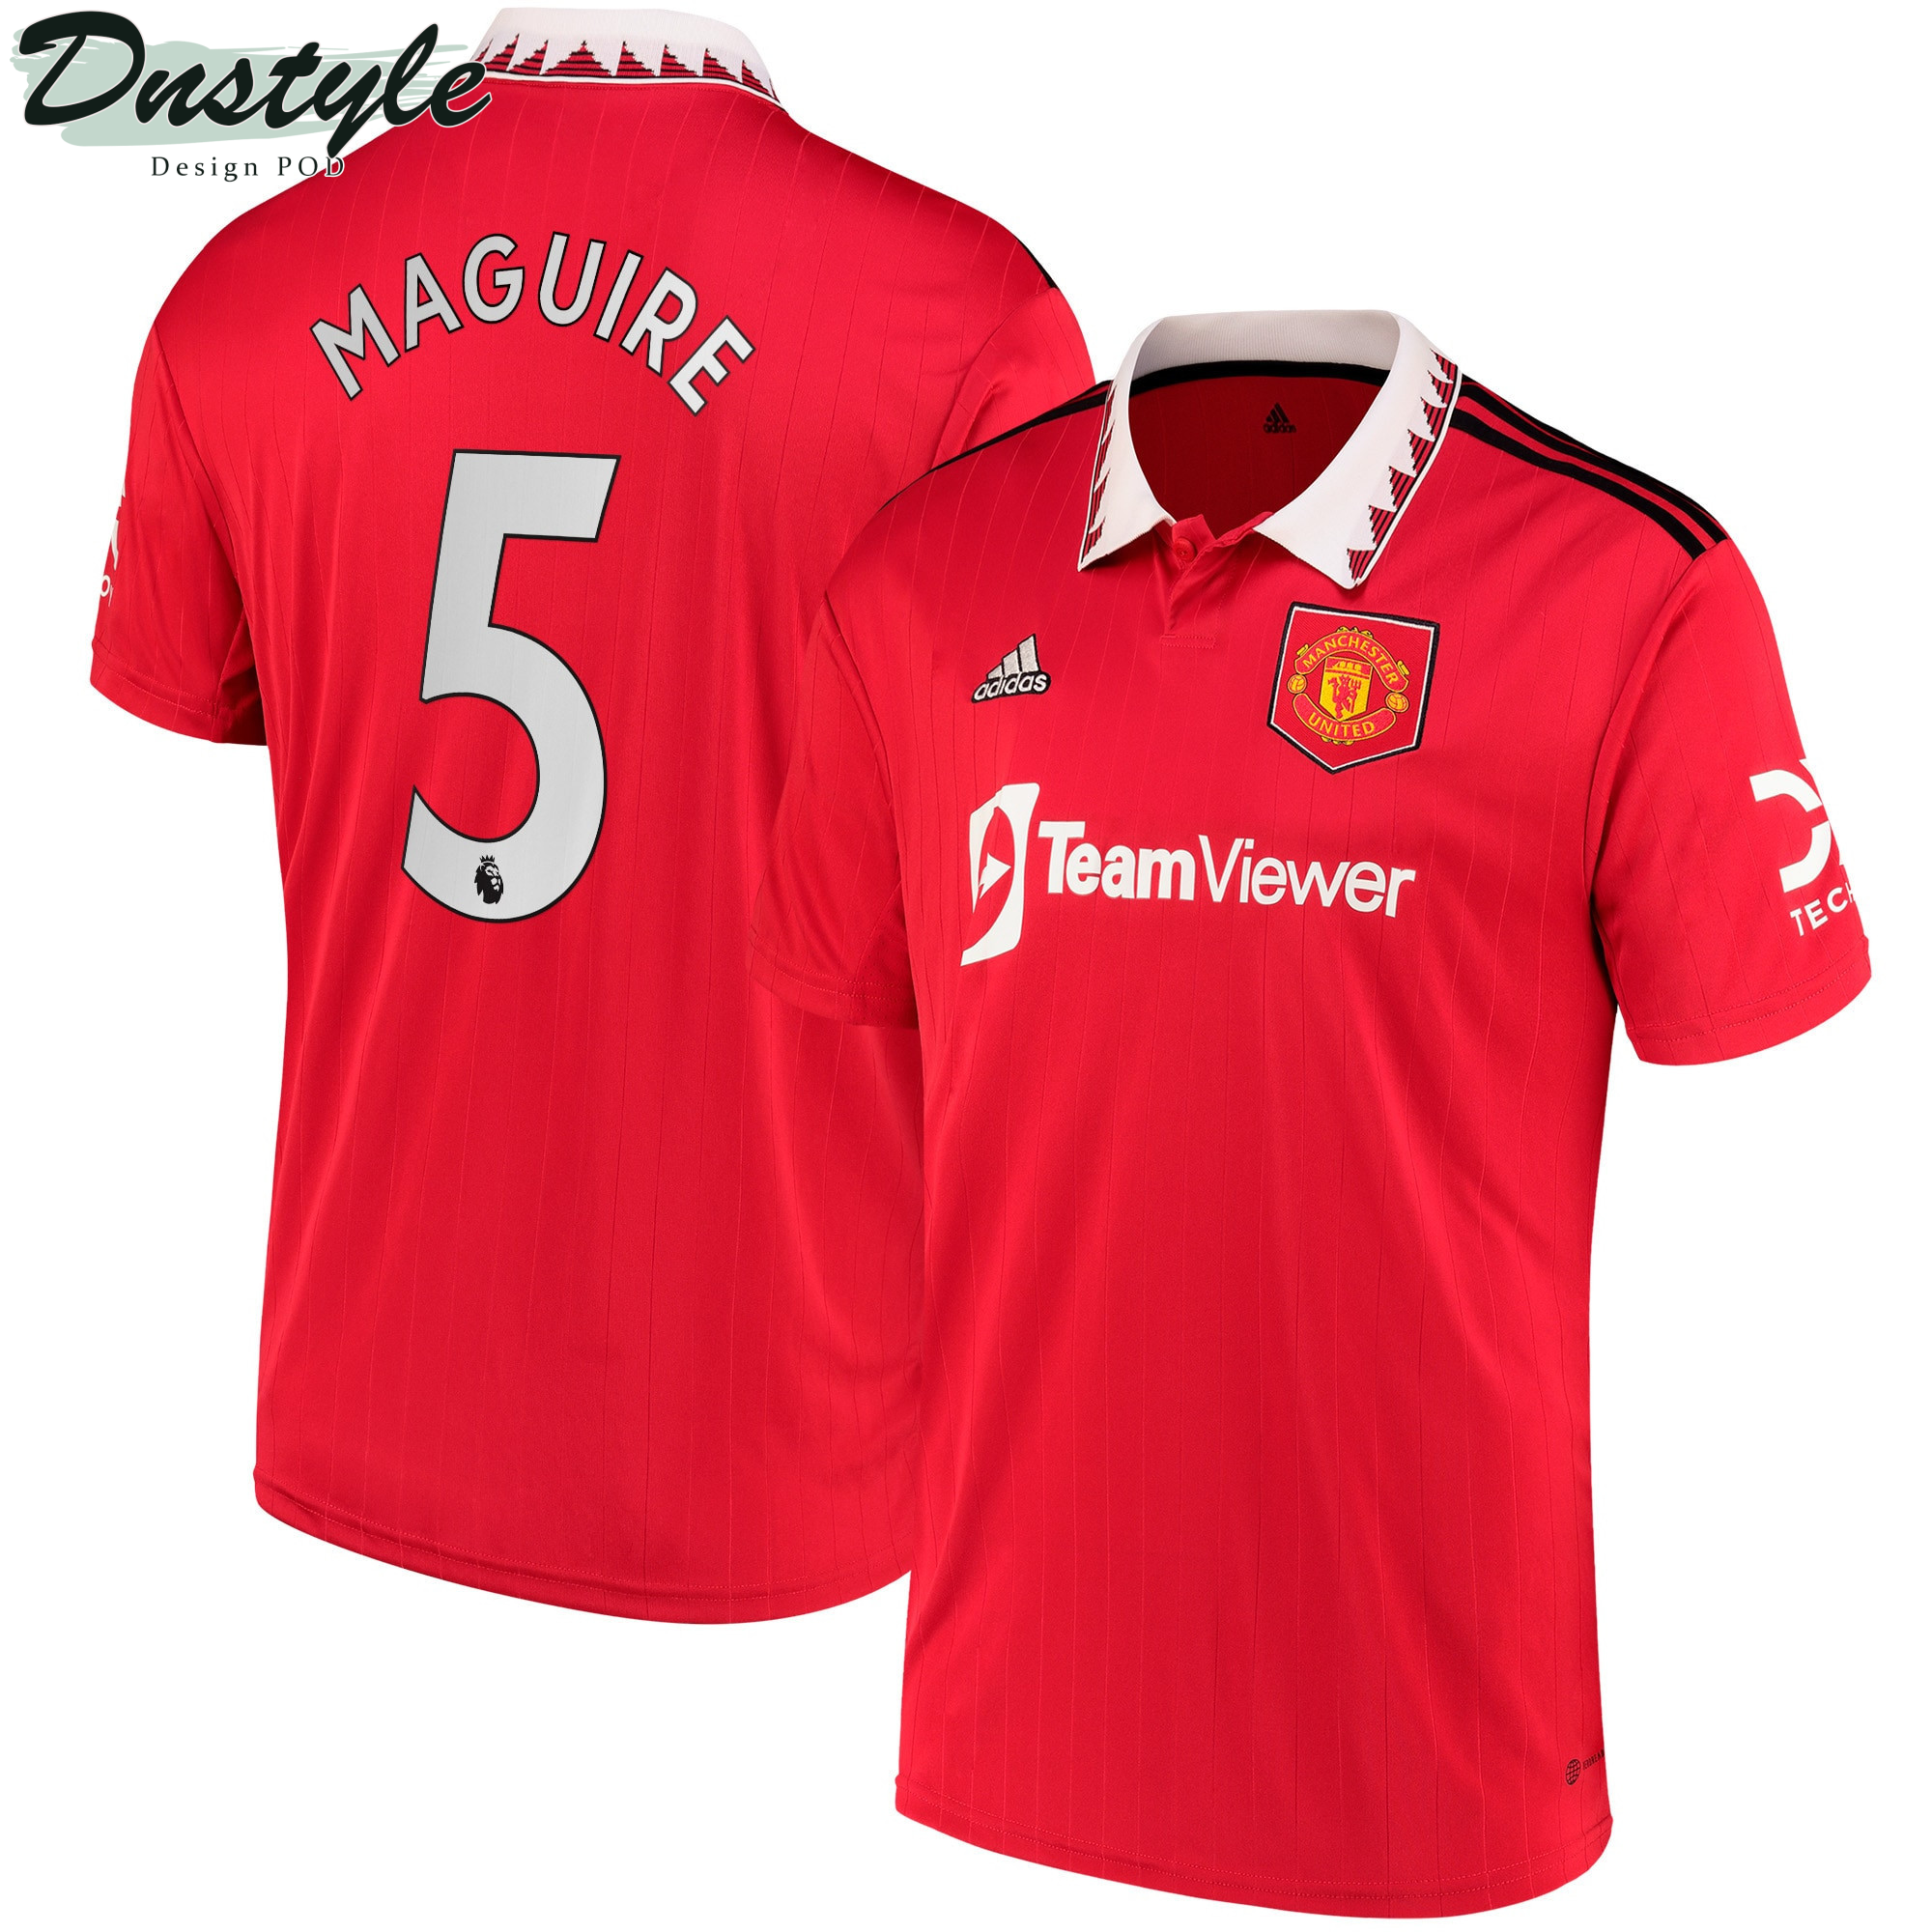 Harry Maguire #5 Manchester United 2022/23 Home Player Jersey - Red